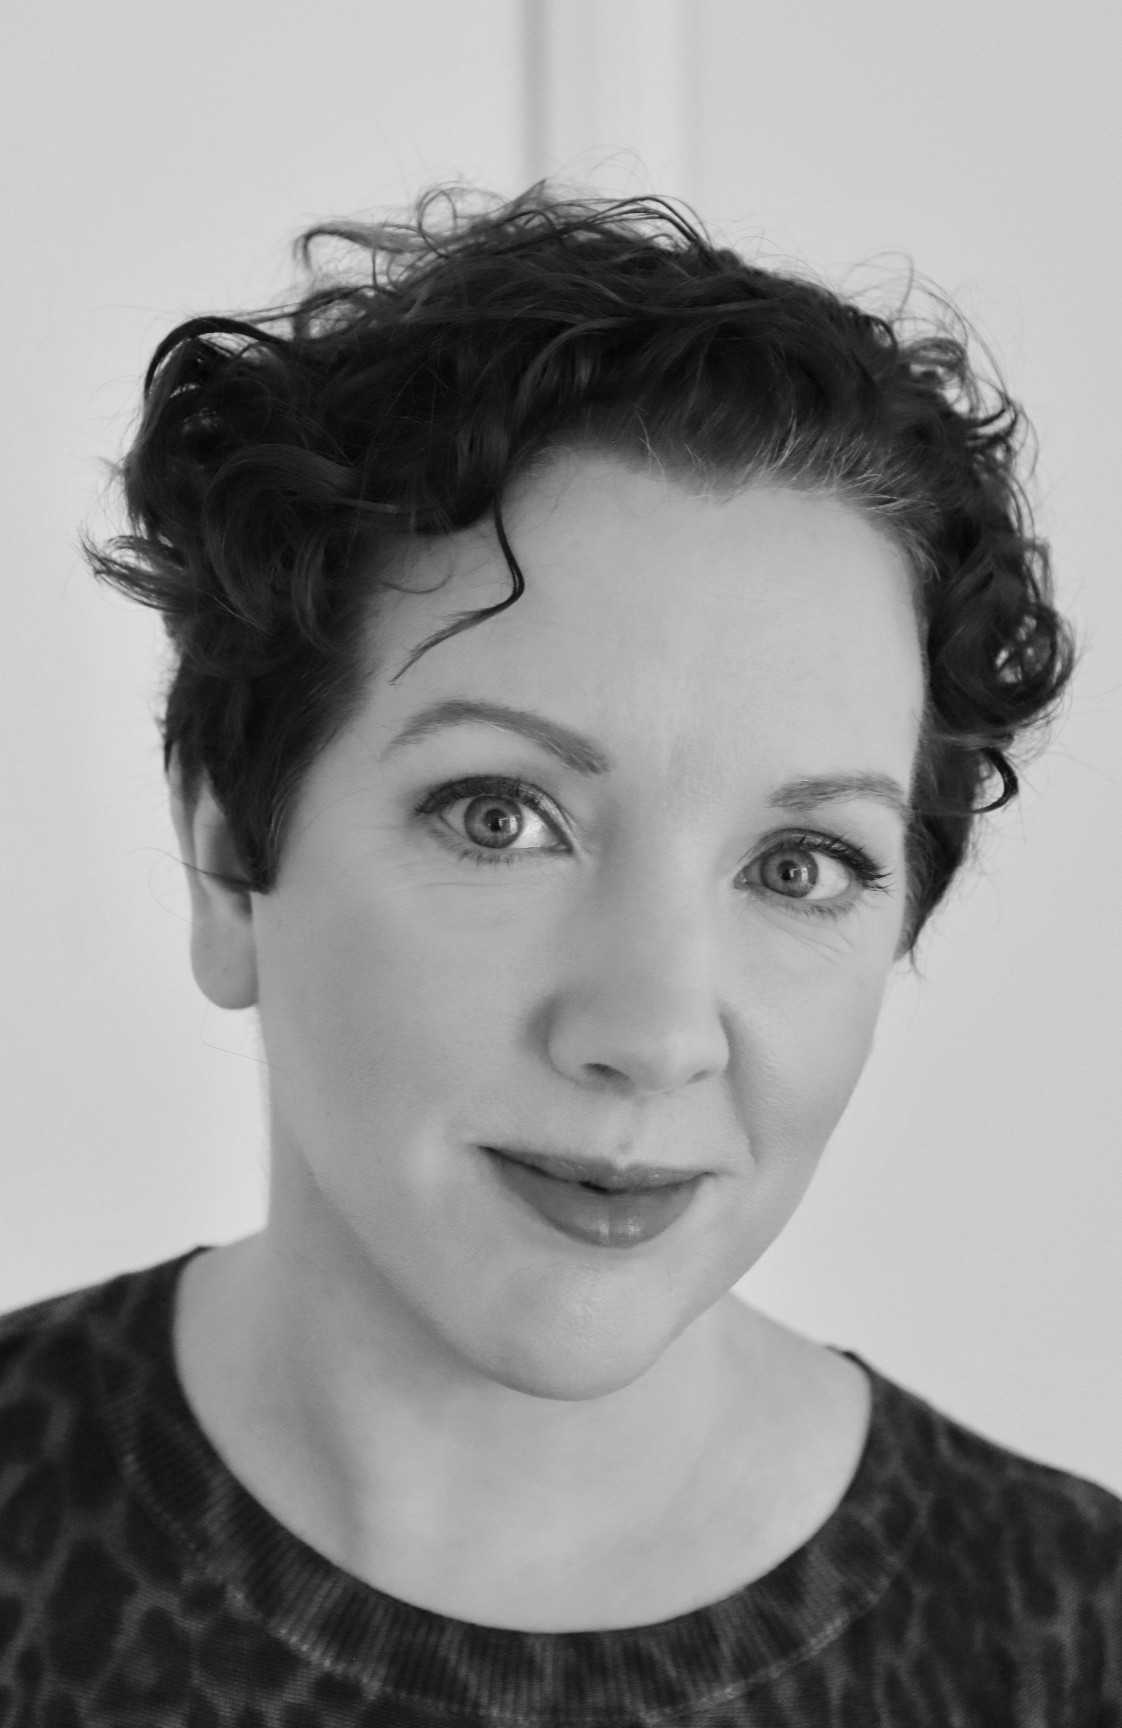 A striking black and white headshot of Master of Publishing (MPub) alumna Claire Cavanagh. Claire has wavy dark pixie-cut hair and is gently smiling towards the camera. 